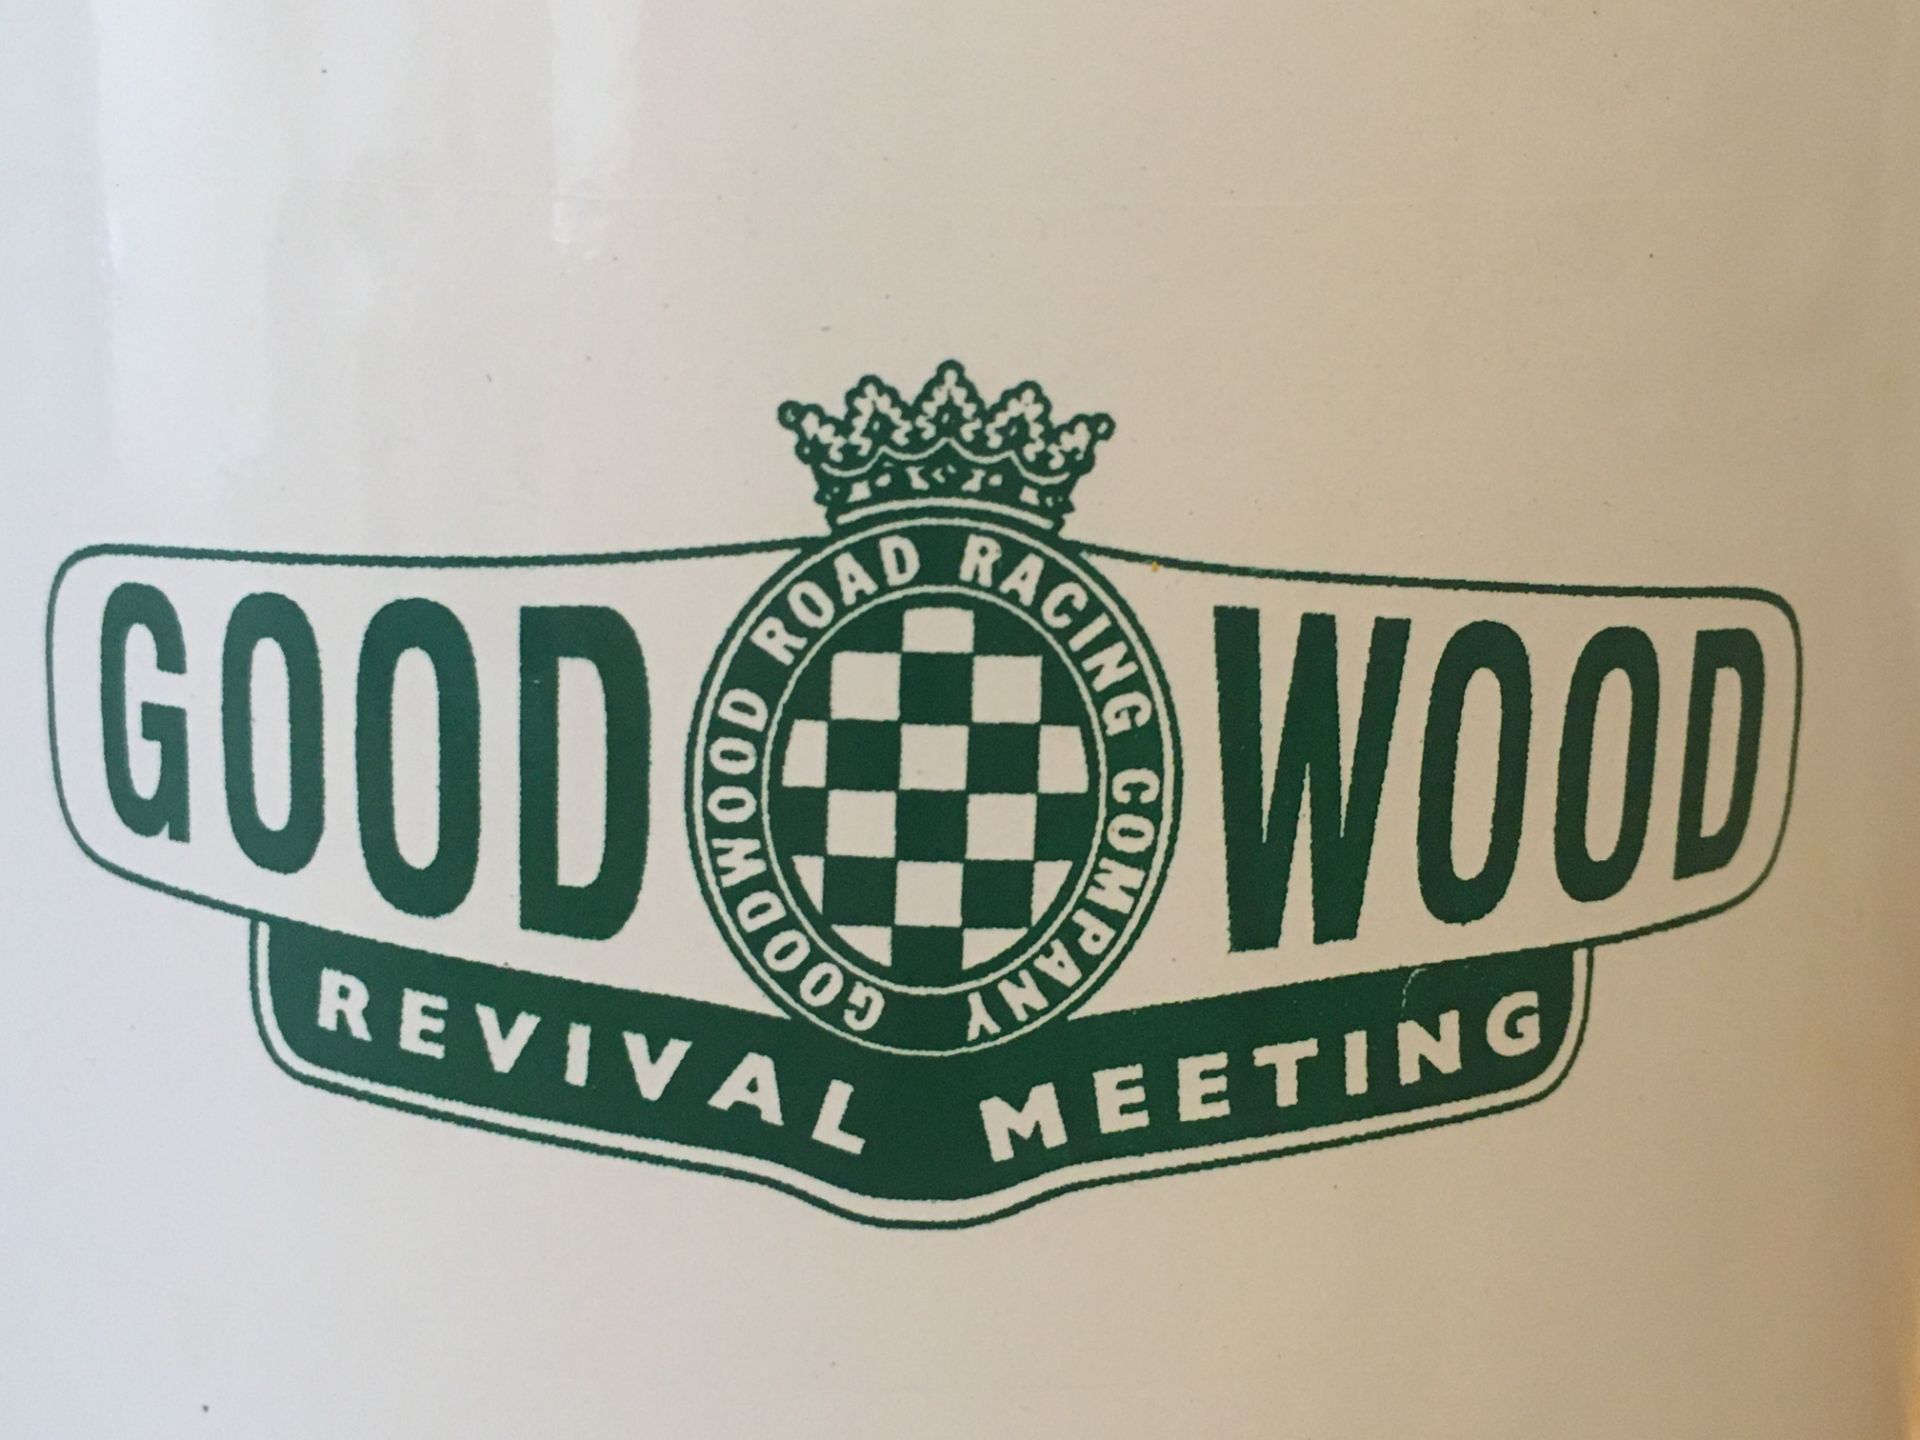 Official Goodwood Revival Meeting Mug - Image 2 of 4